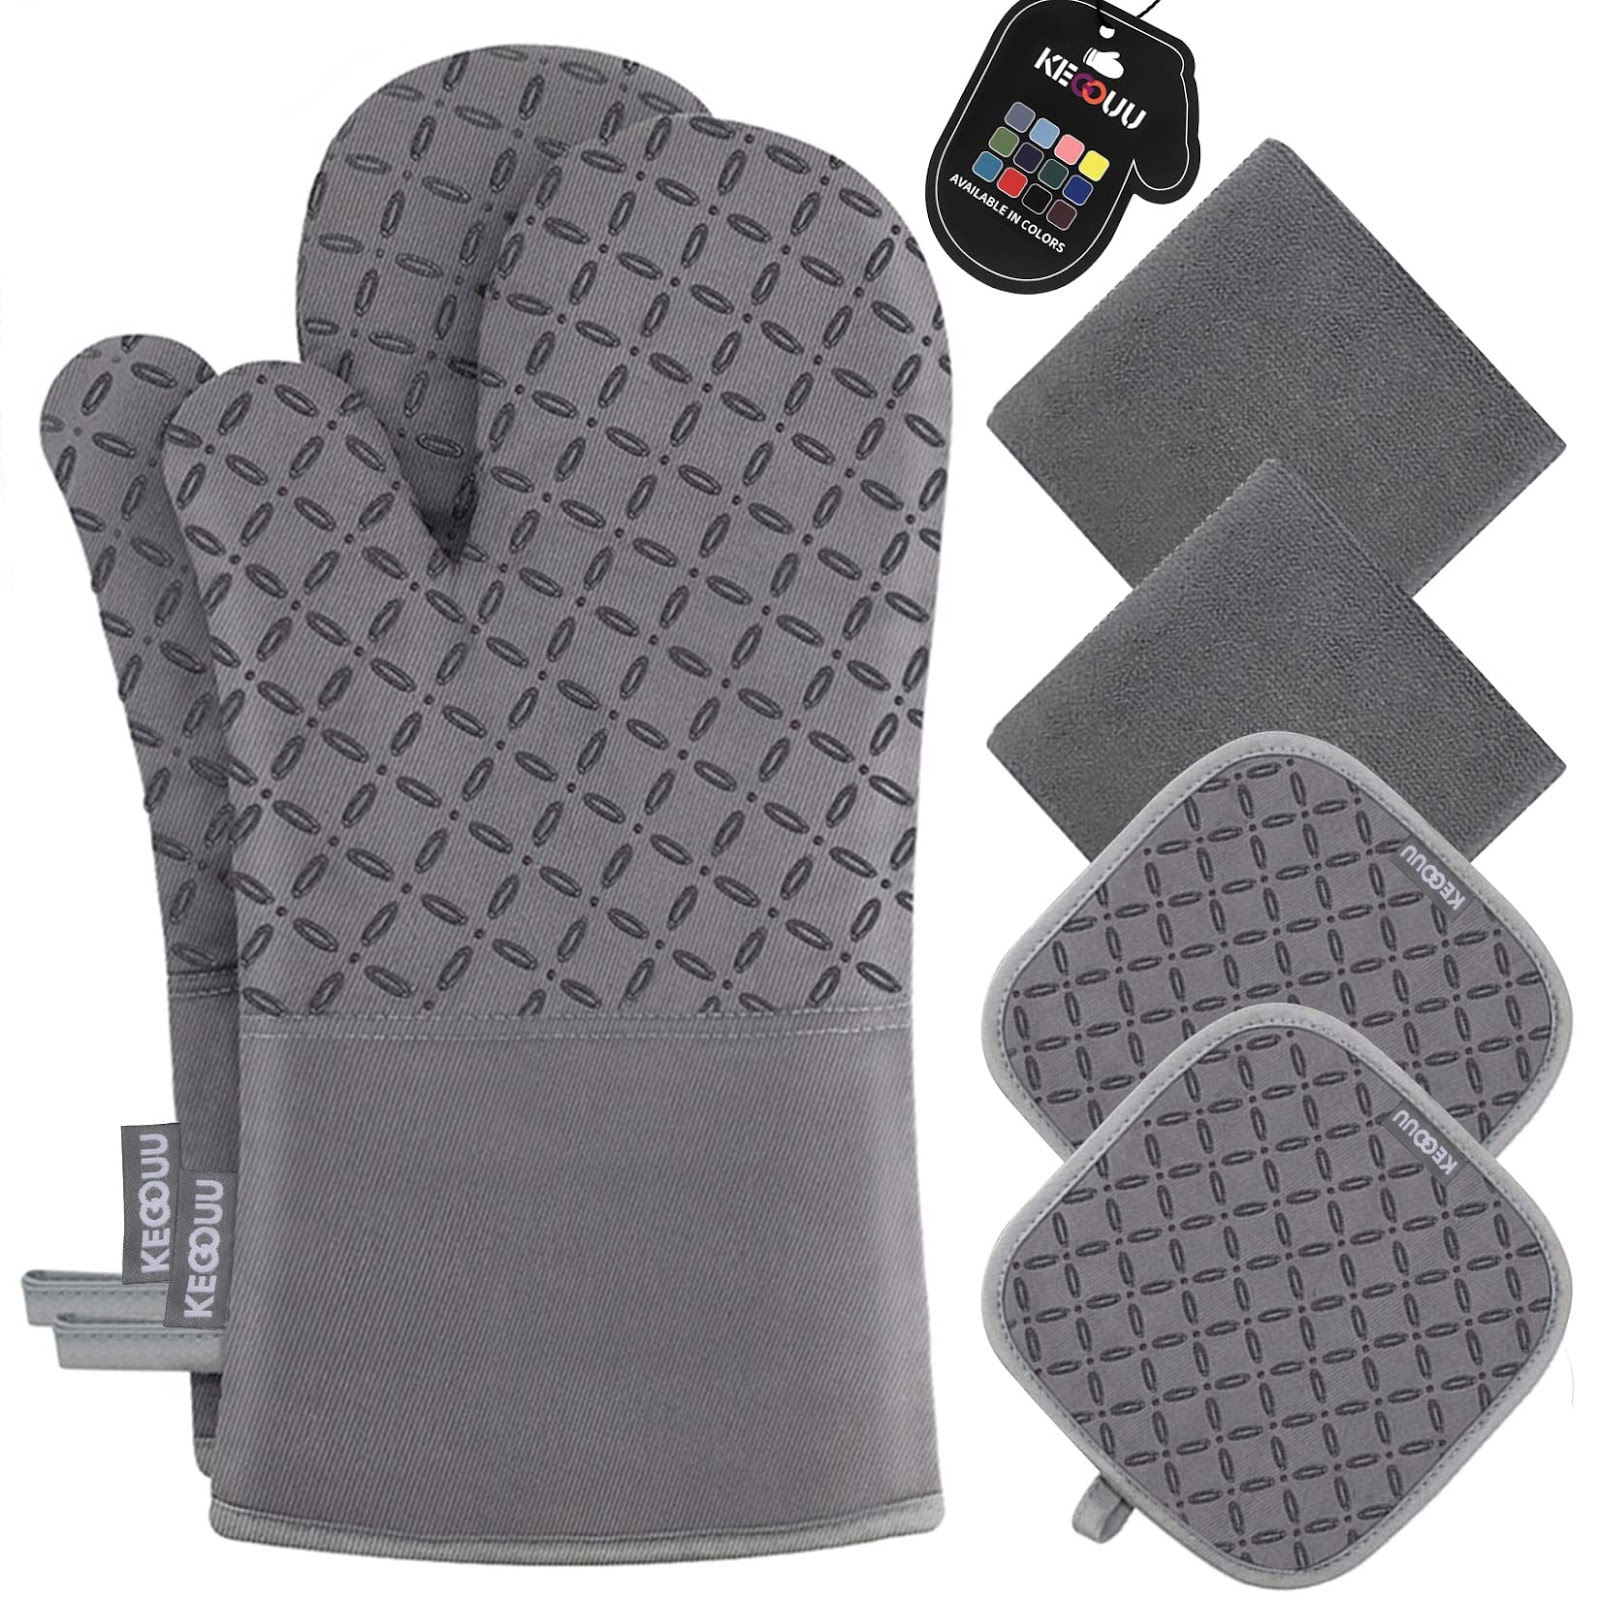 KEGOUU Oven Mitts and Pot Holders